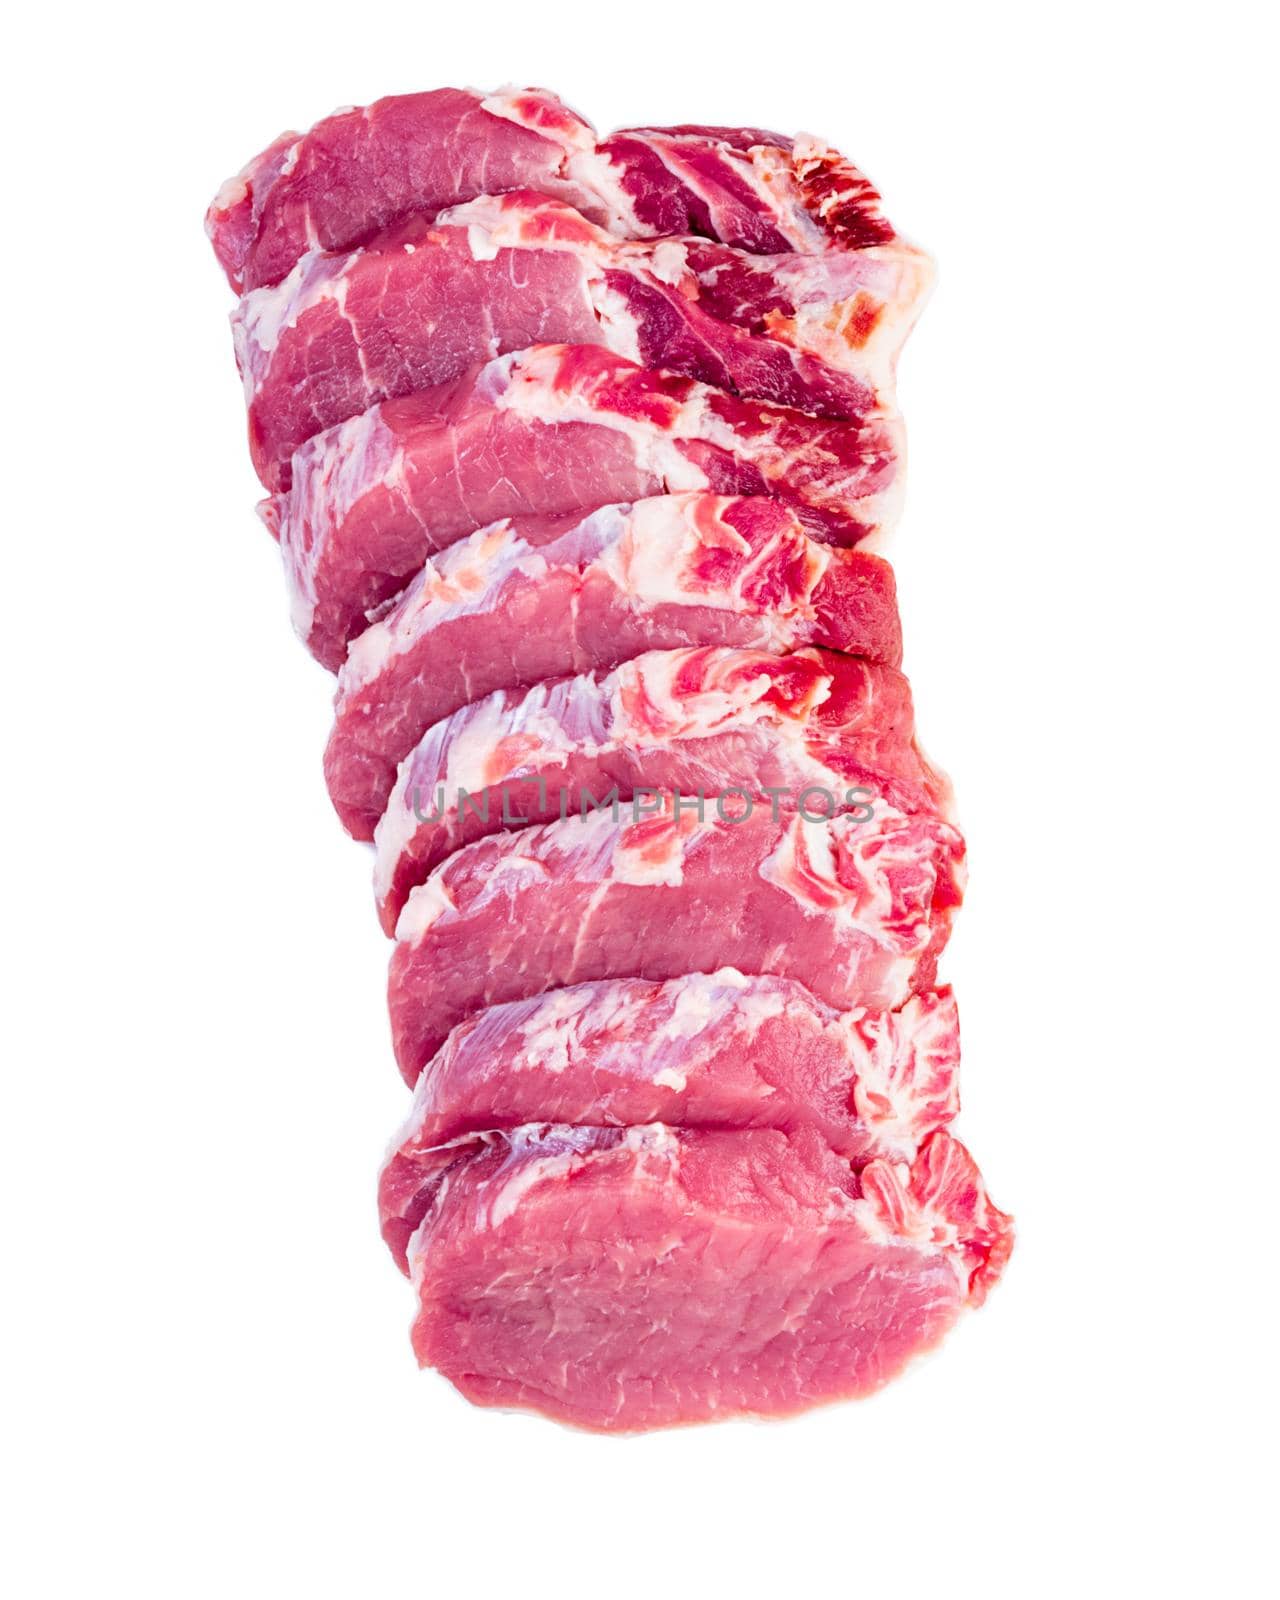 pork meat slices loin isolated on white background, top view, vertical.